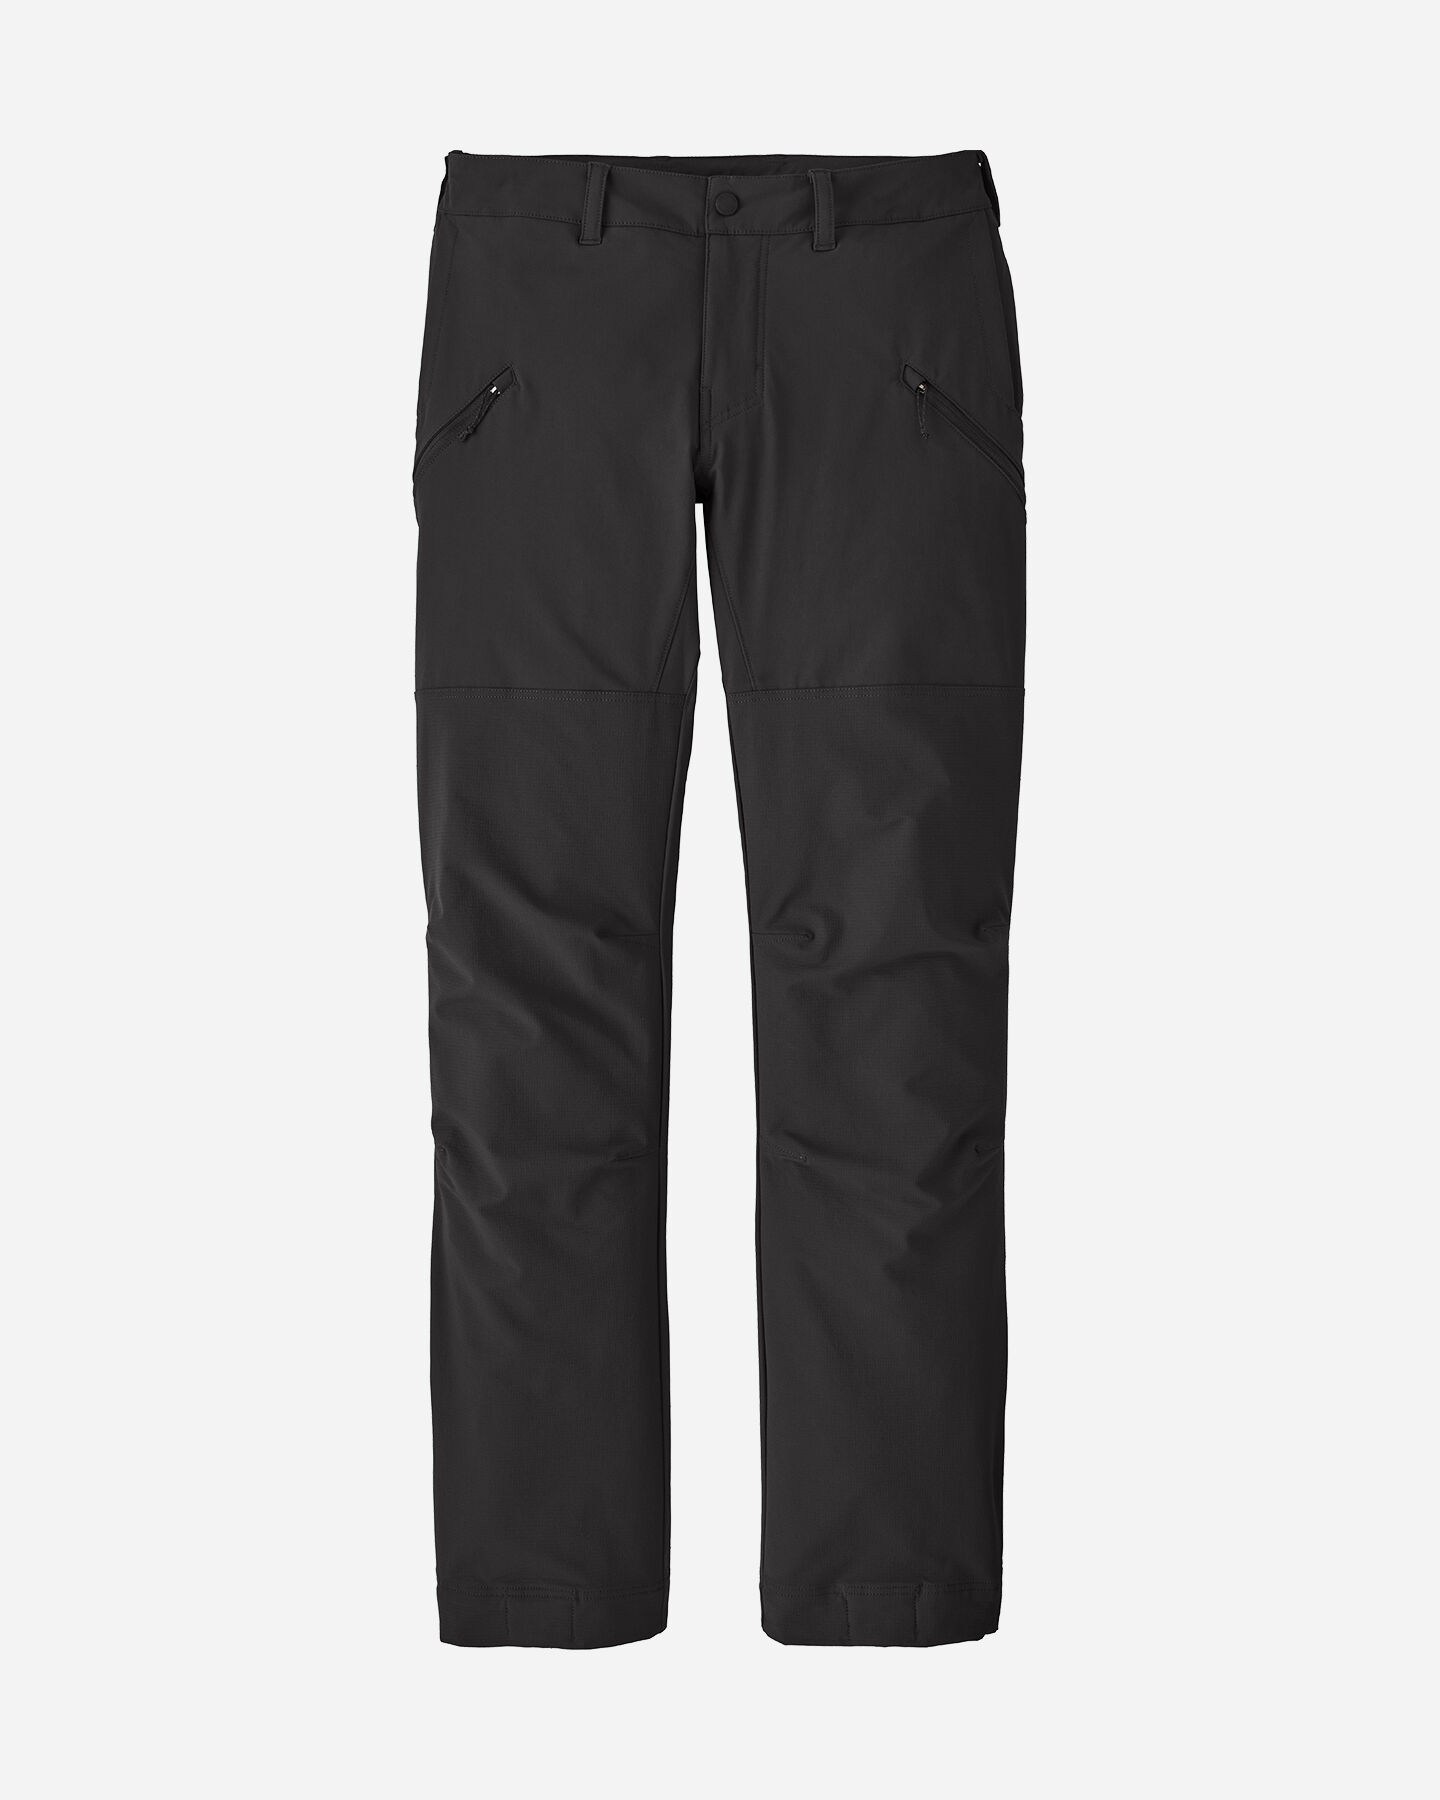  Pantalone outdoor PATAGONIA POINT PEAK TRAIL W S5443260|BLK|8 scatto 0